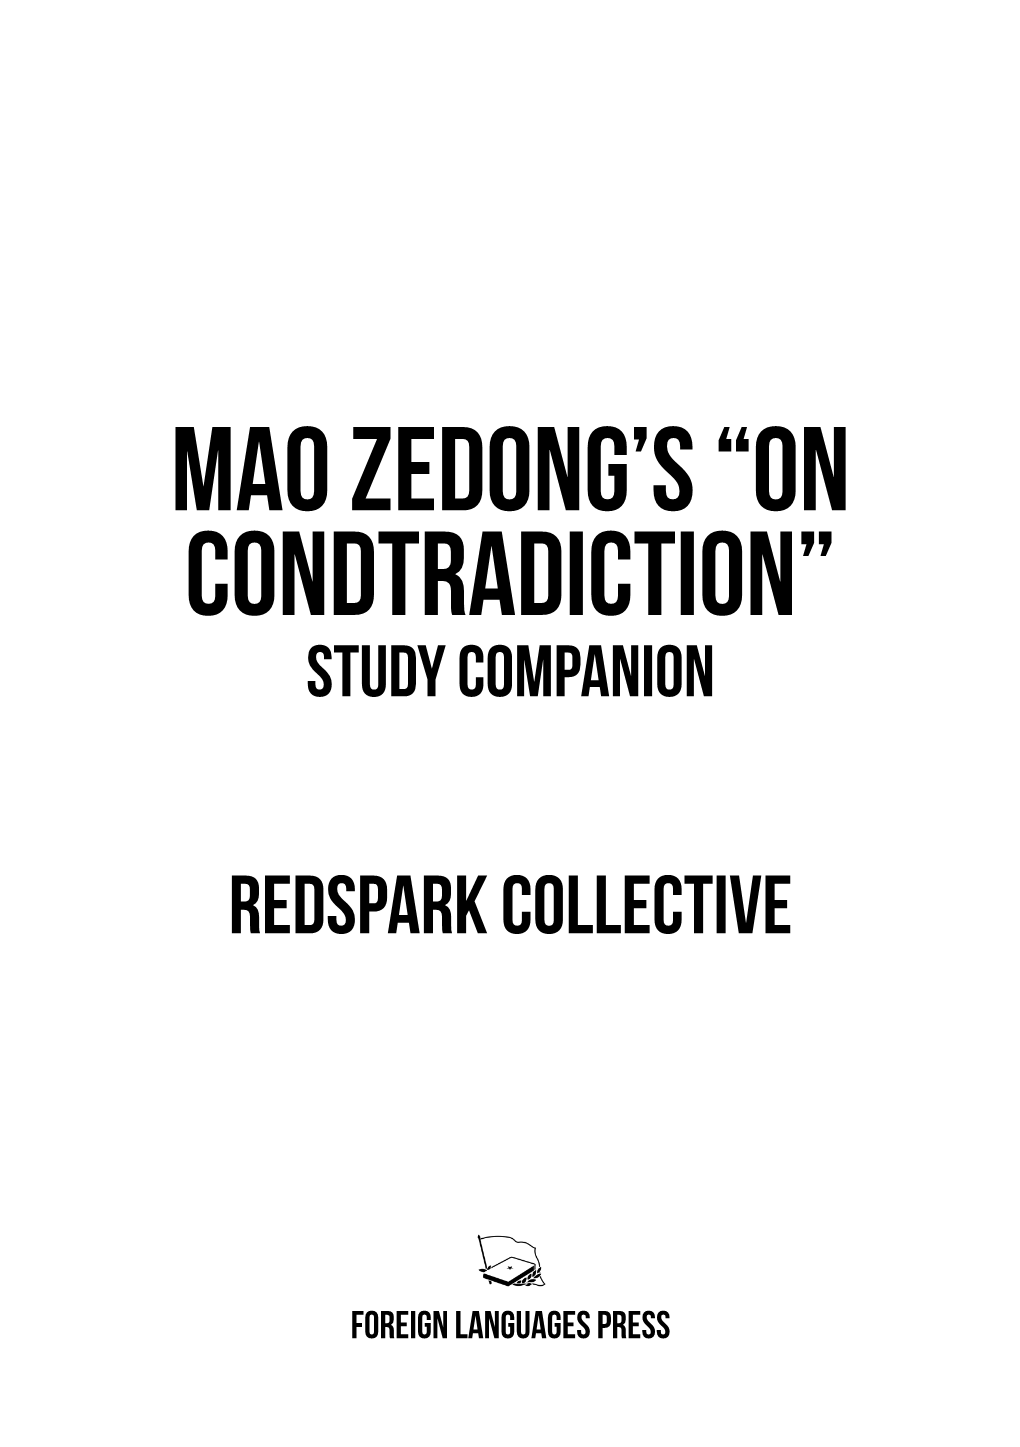 Mao Zedong's “On Condtradiction”